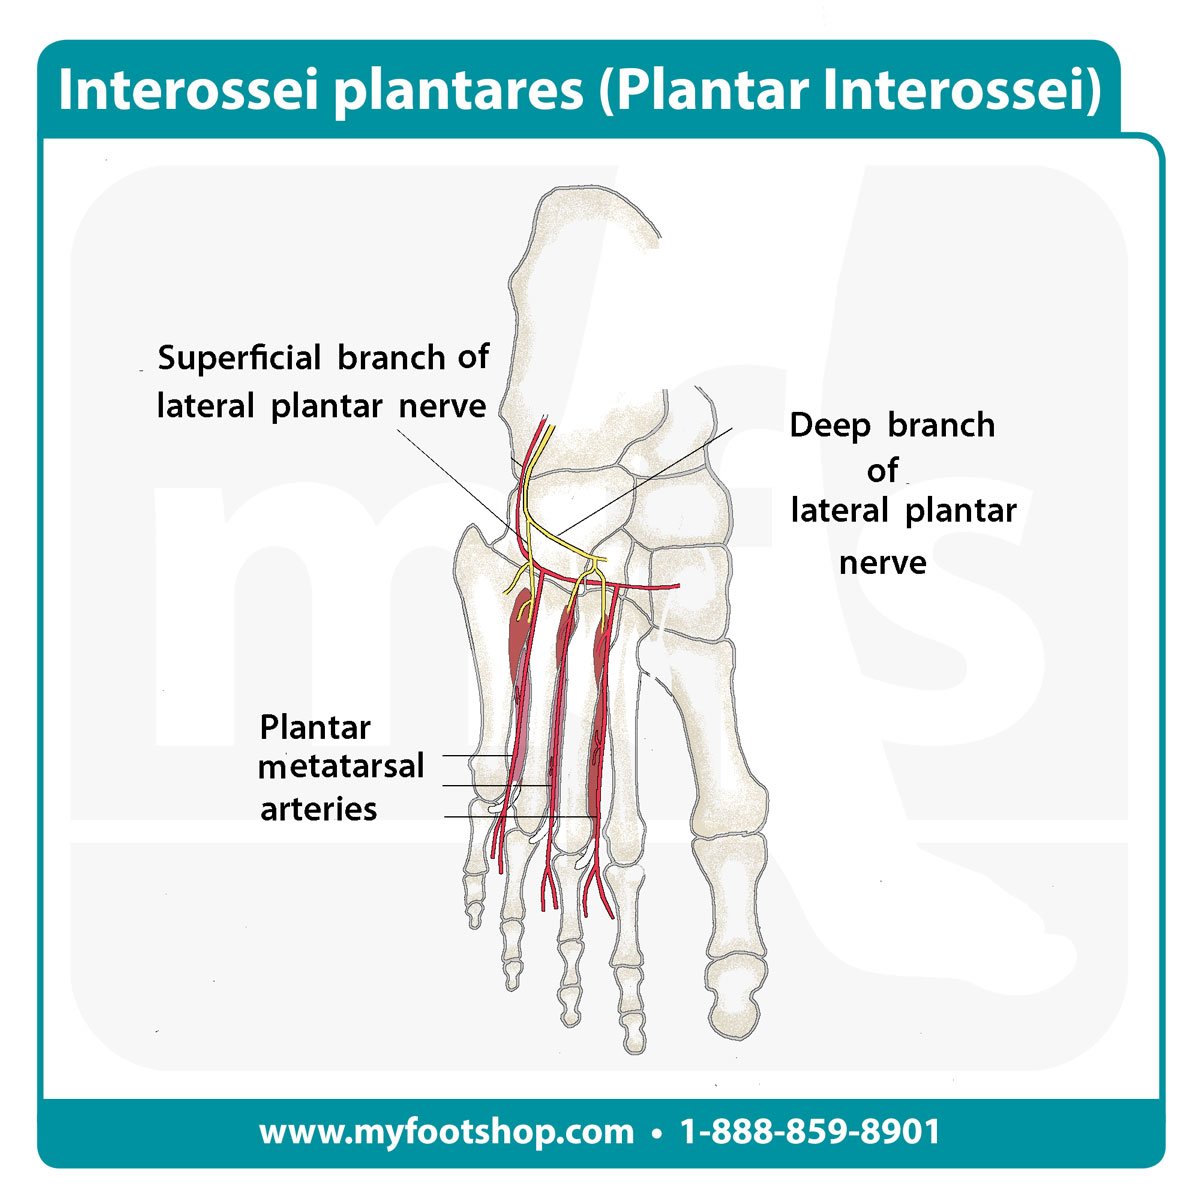 Image of the plantar interossei muscles of the foot